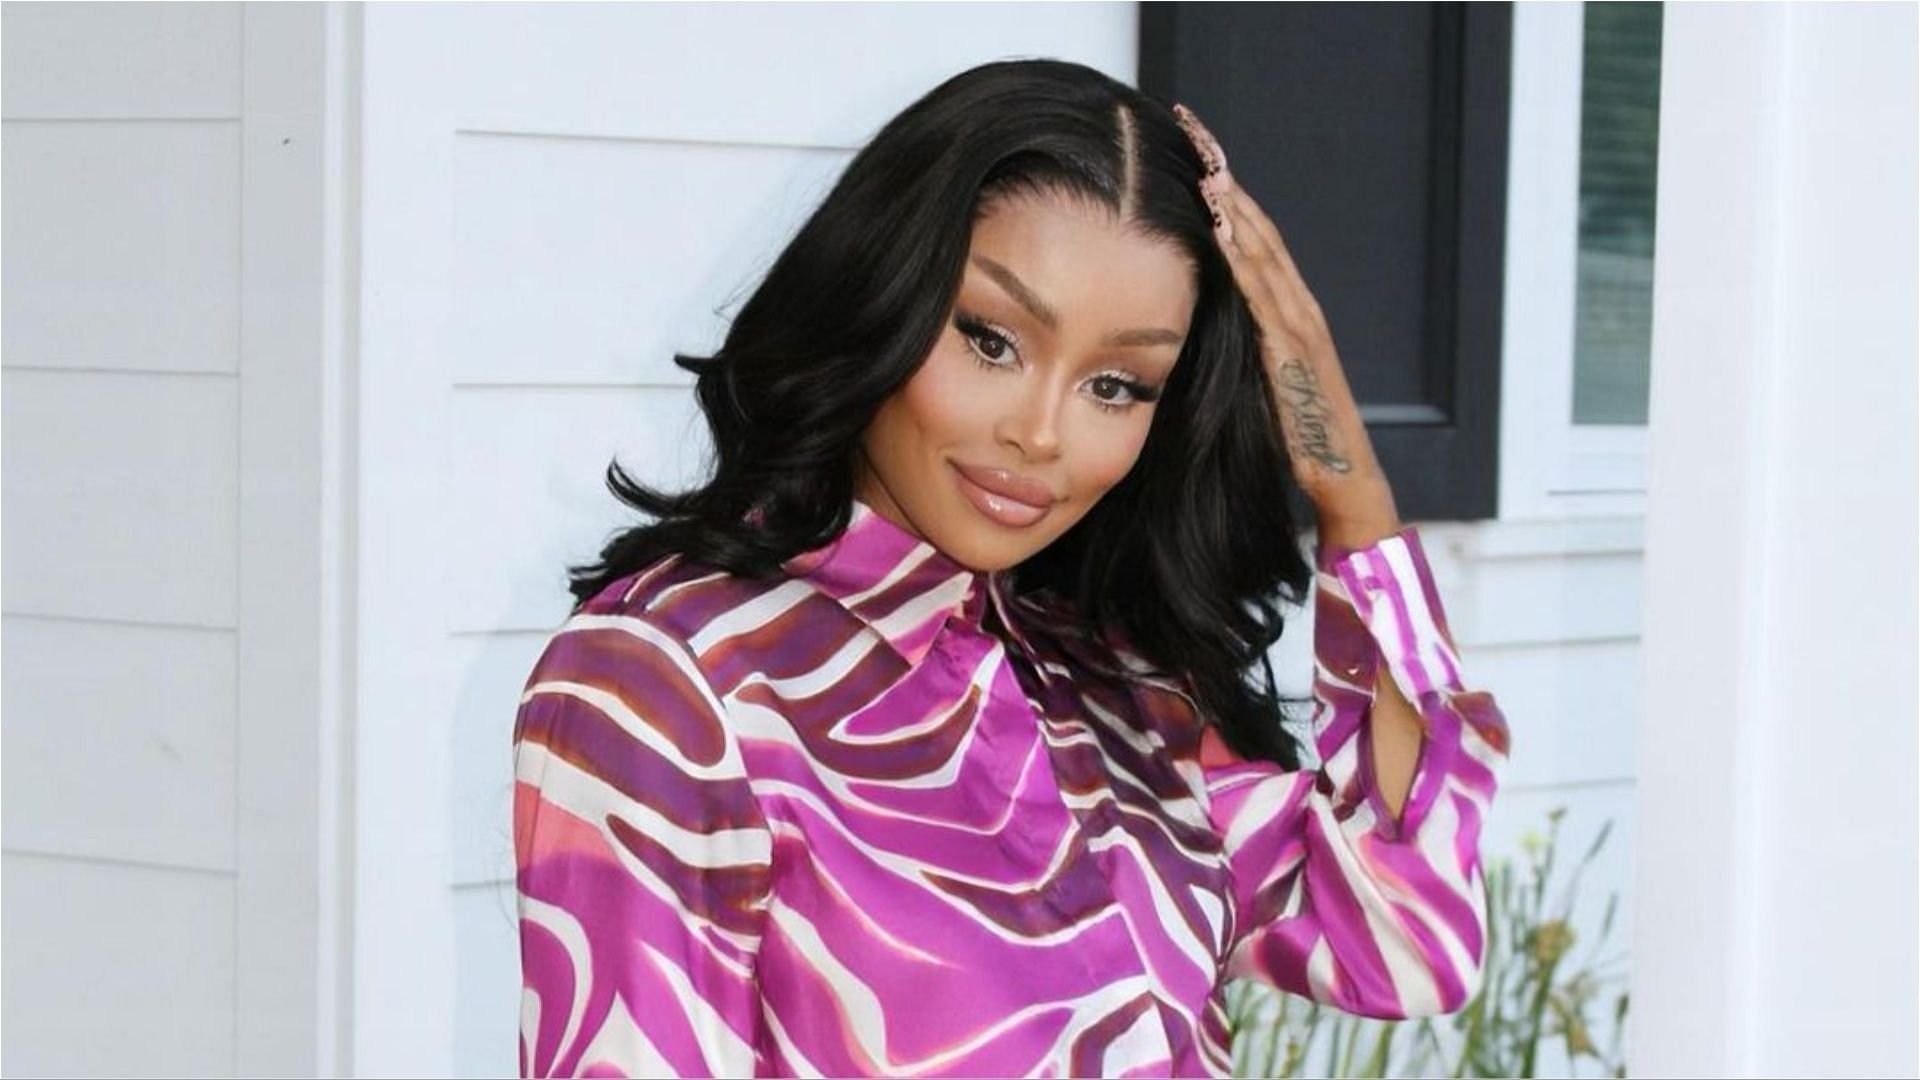 Blac Chyna has sold her personal belongings due to her custody battle (Image via blacchyna/Instagram)